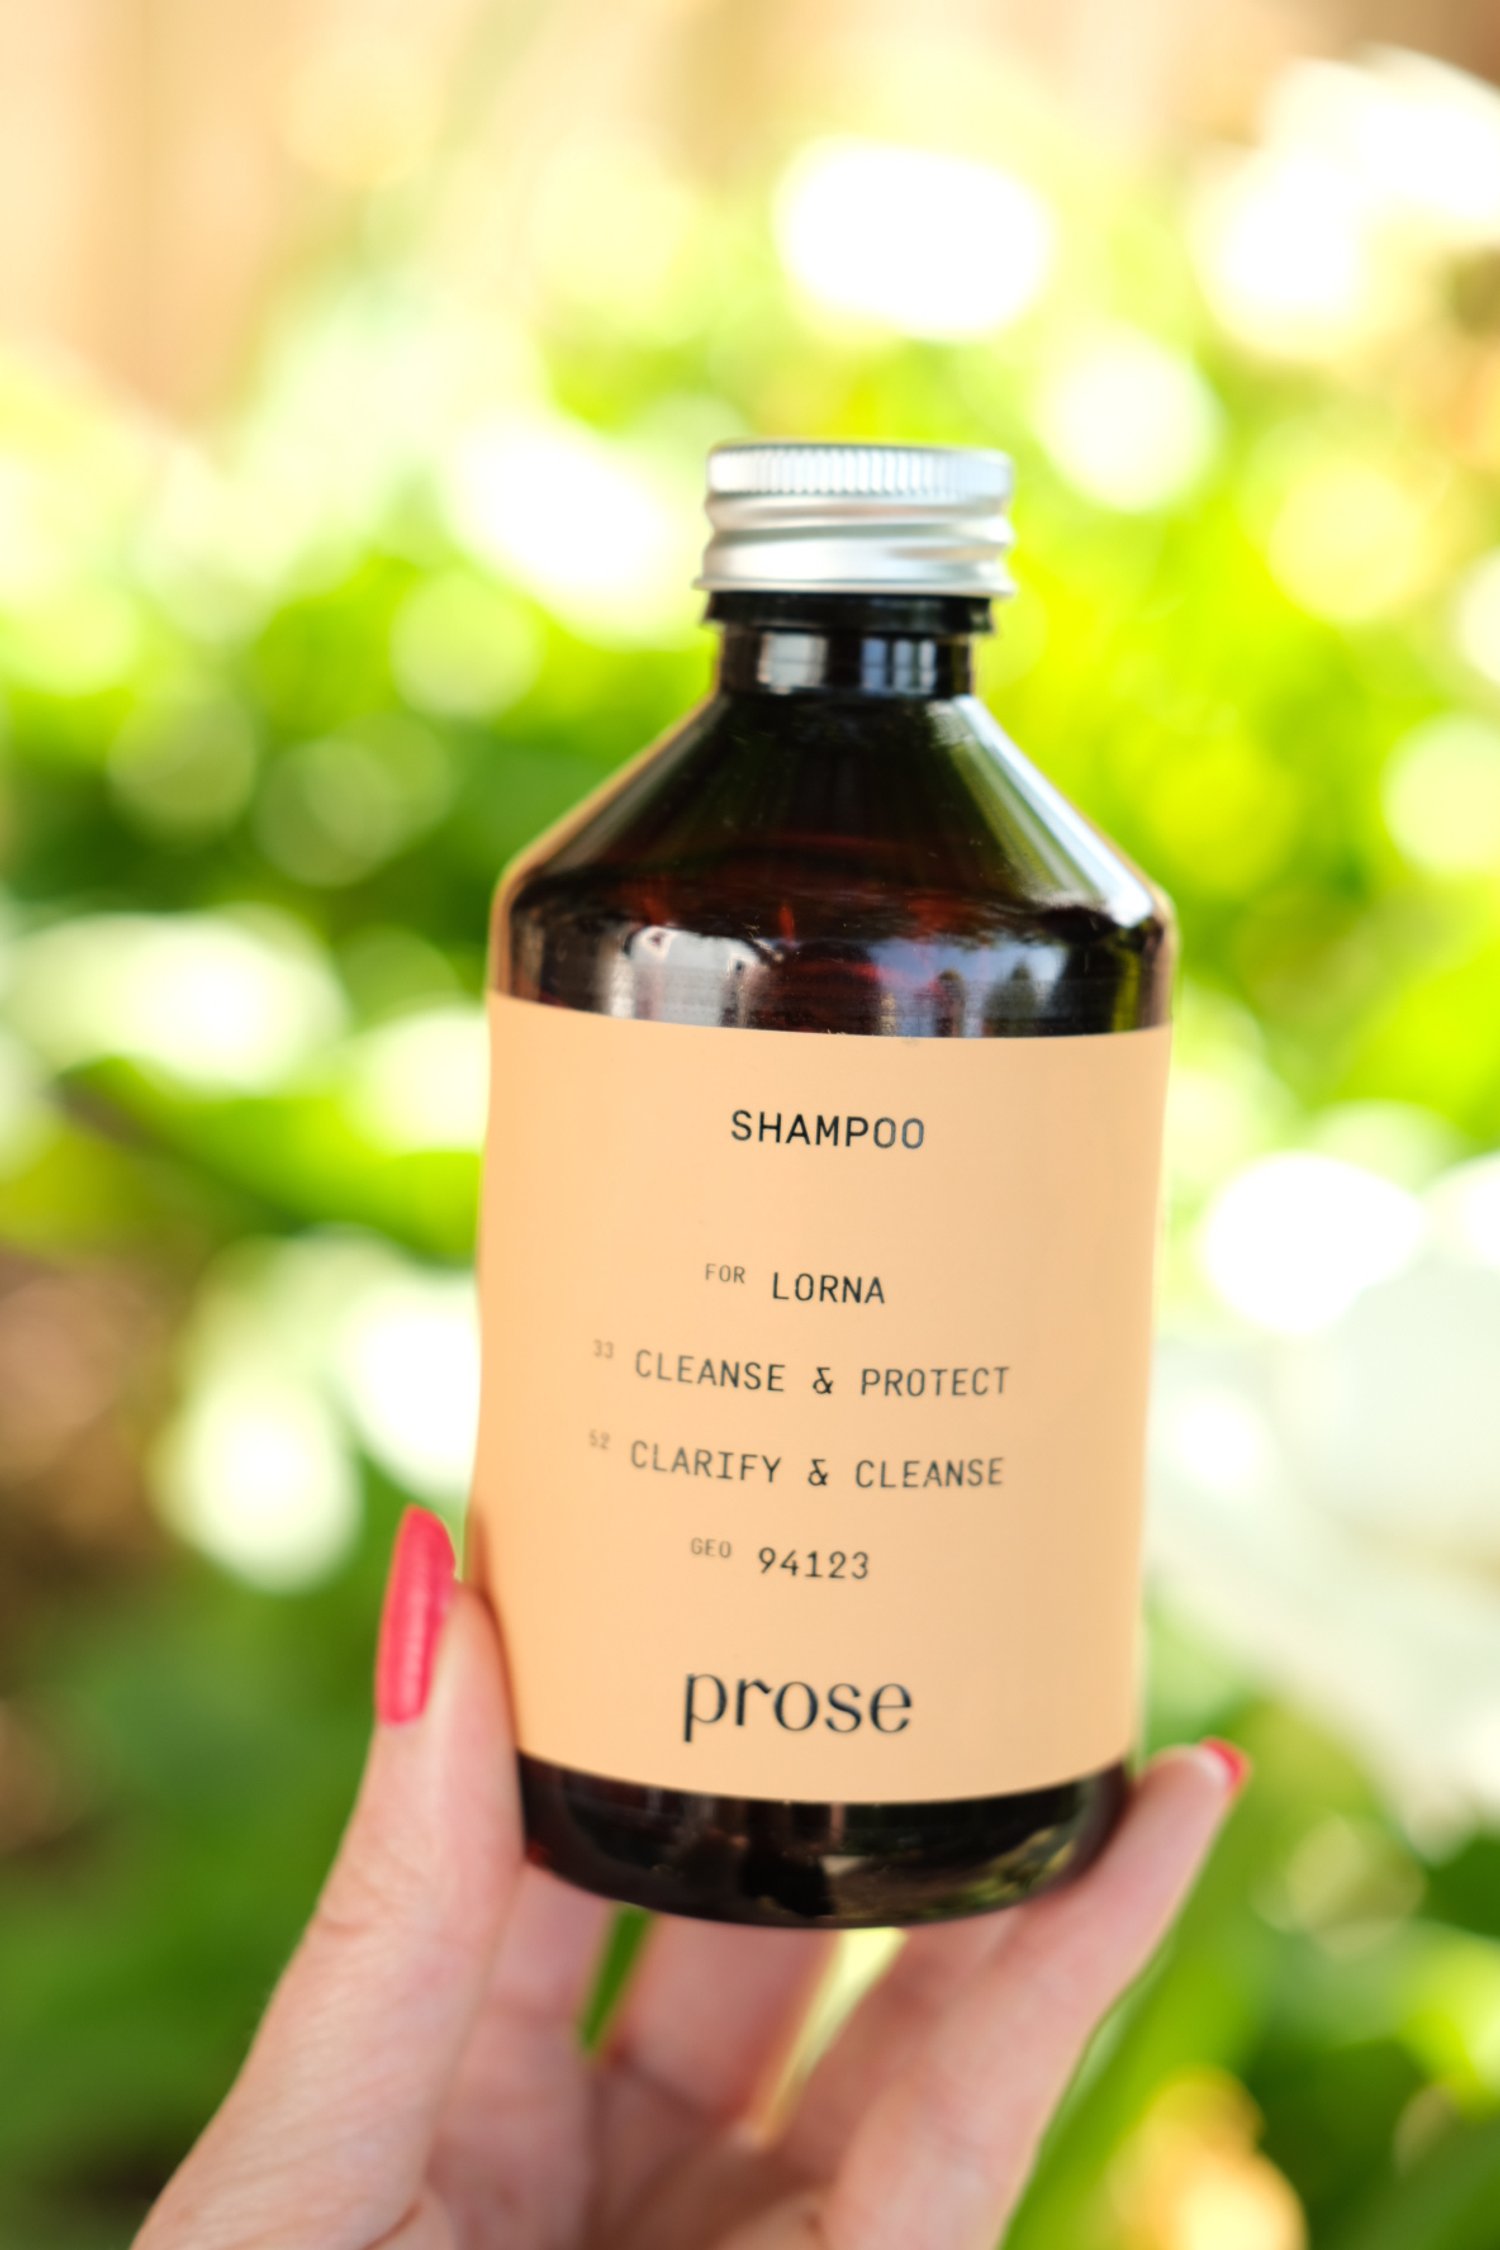 Looking for Prose shampoo reviews? Want to know is Prose shampoo worth it? Are you deciding what Prose scent to choose for your Prose shampoo? Want to know how much Prose shampoo costs? Get all the details in this honest Prose shampoo review!